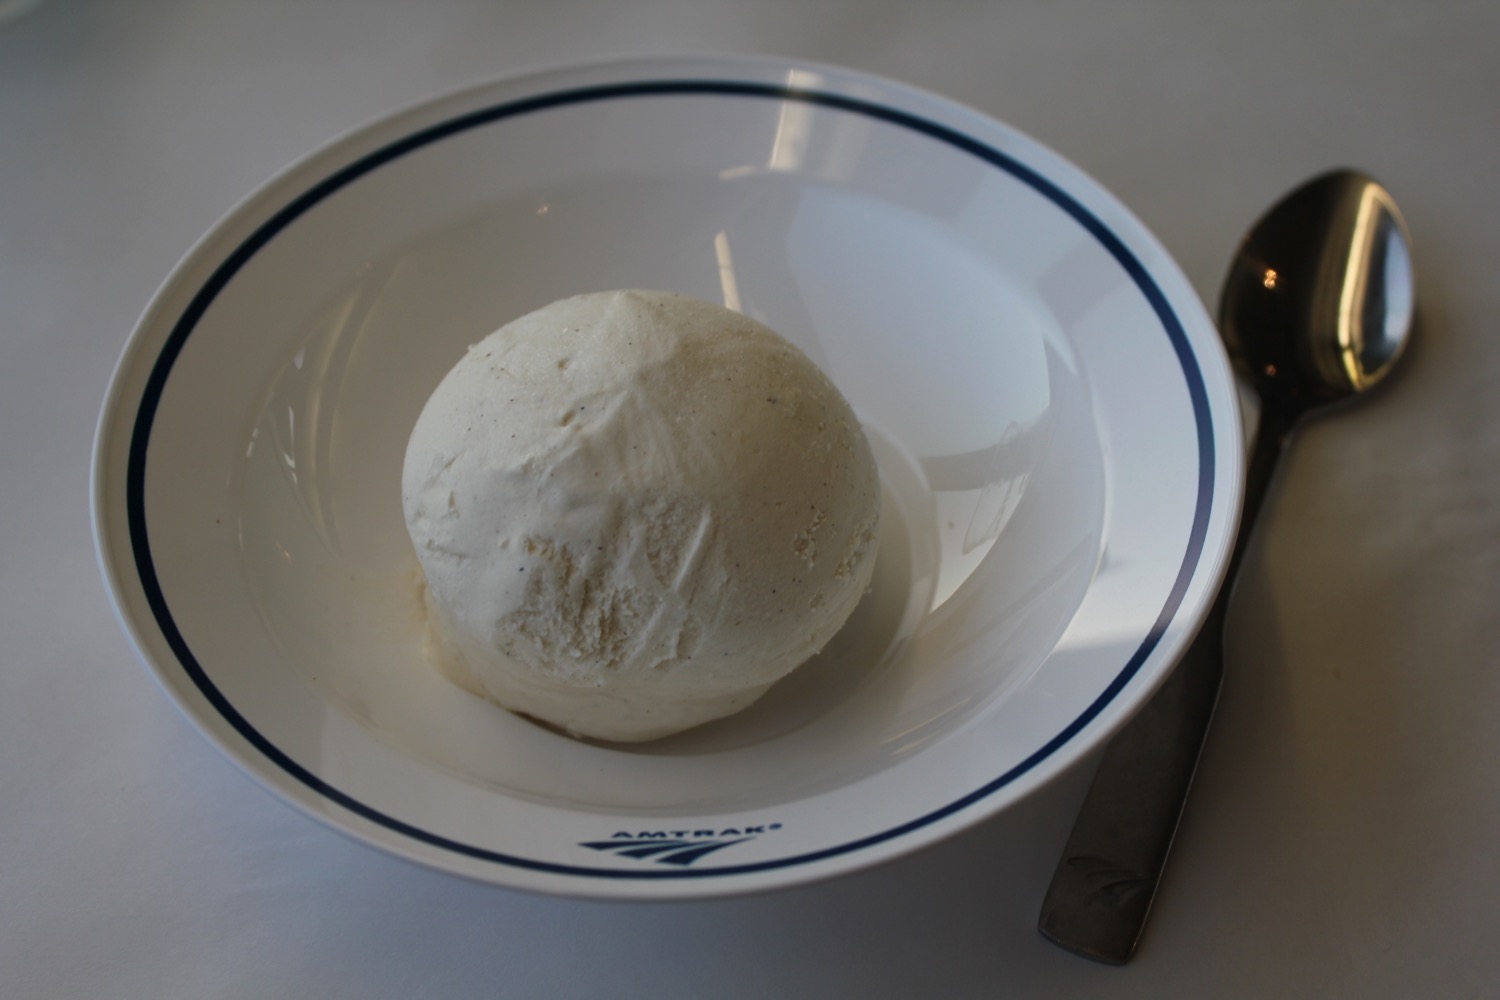 a white ball of ice cream on a white plate with blue trim